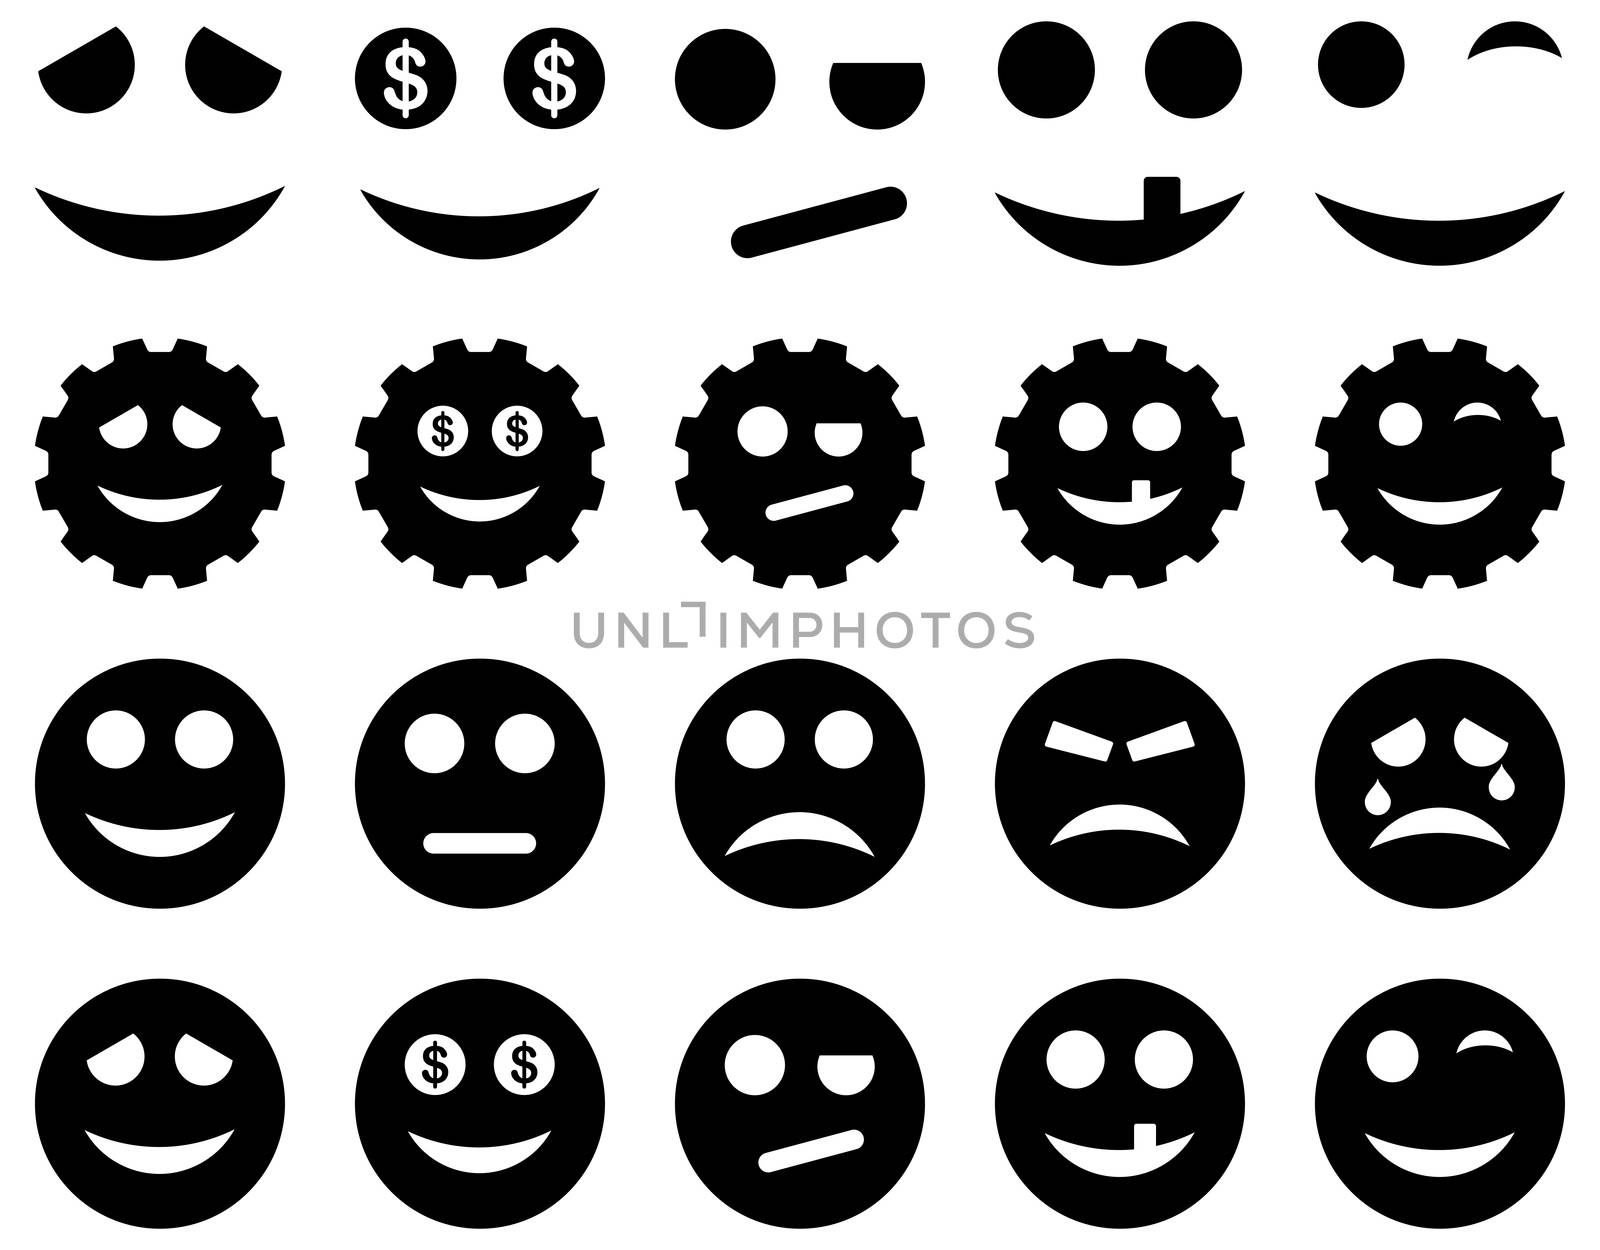 Tools, gears, smiles, emoticons icons. Glyph set style is flat images, black symbols, isolated on a white background.